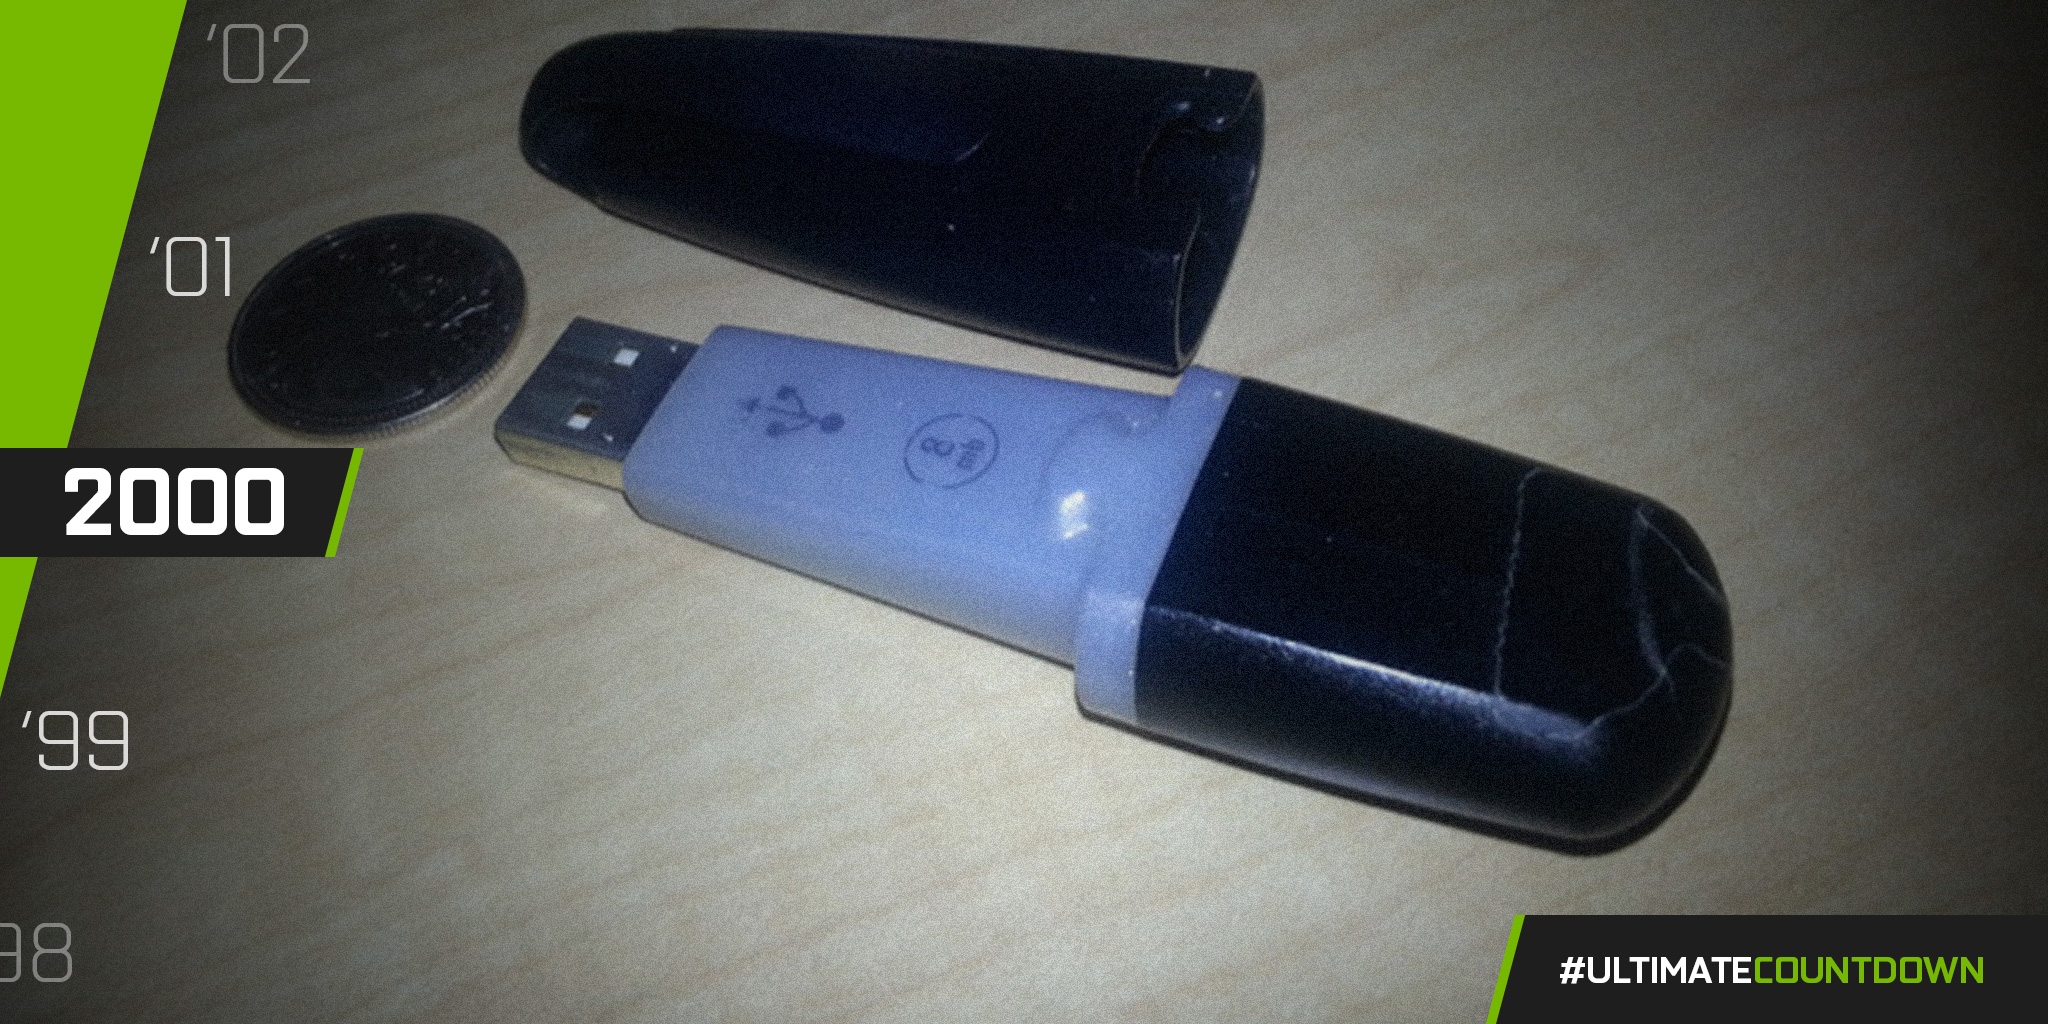 WD_BLACK on Twitter: "In the year 2000, the first USB flash drives are introduced to the public. The first USB flash drives stored up to 8MB, than five times the capacity